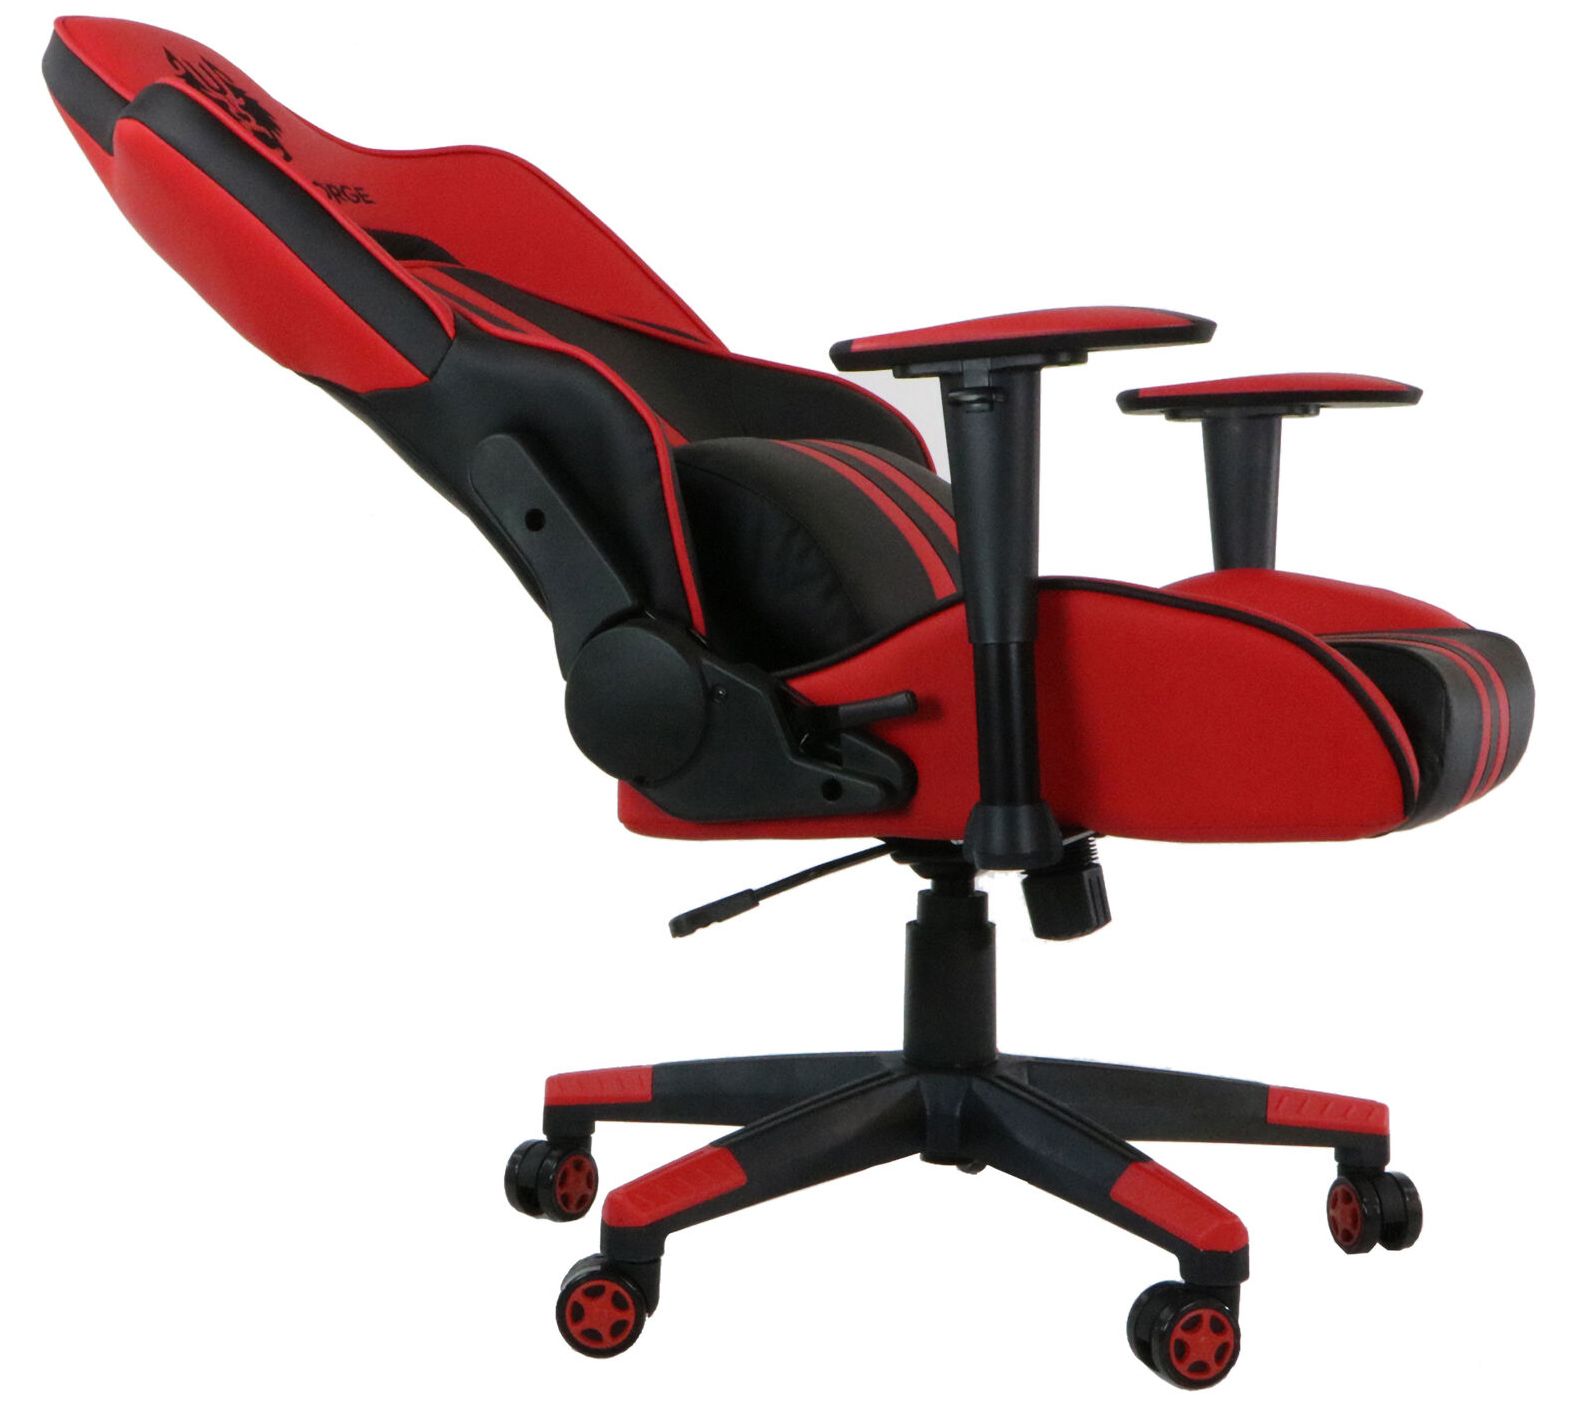 Hanover Commando Ergonomic Gaming Chair with Adjustable GAS Lift Seating, Lumbar and Neck Support - Black and Red